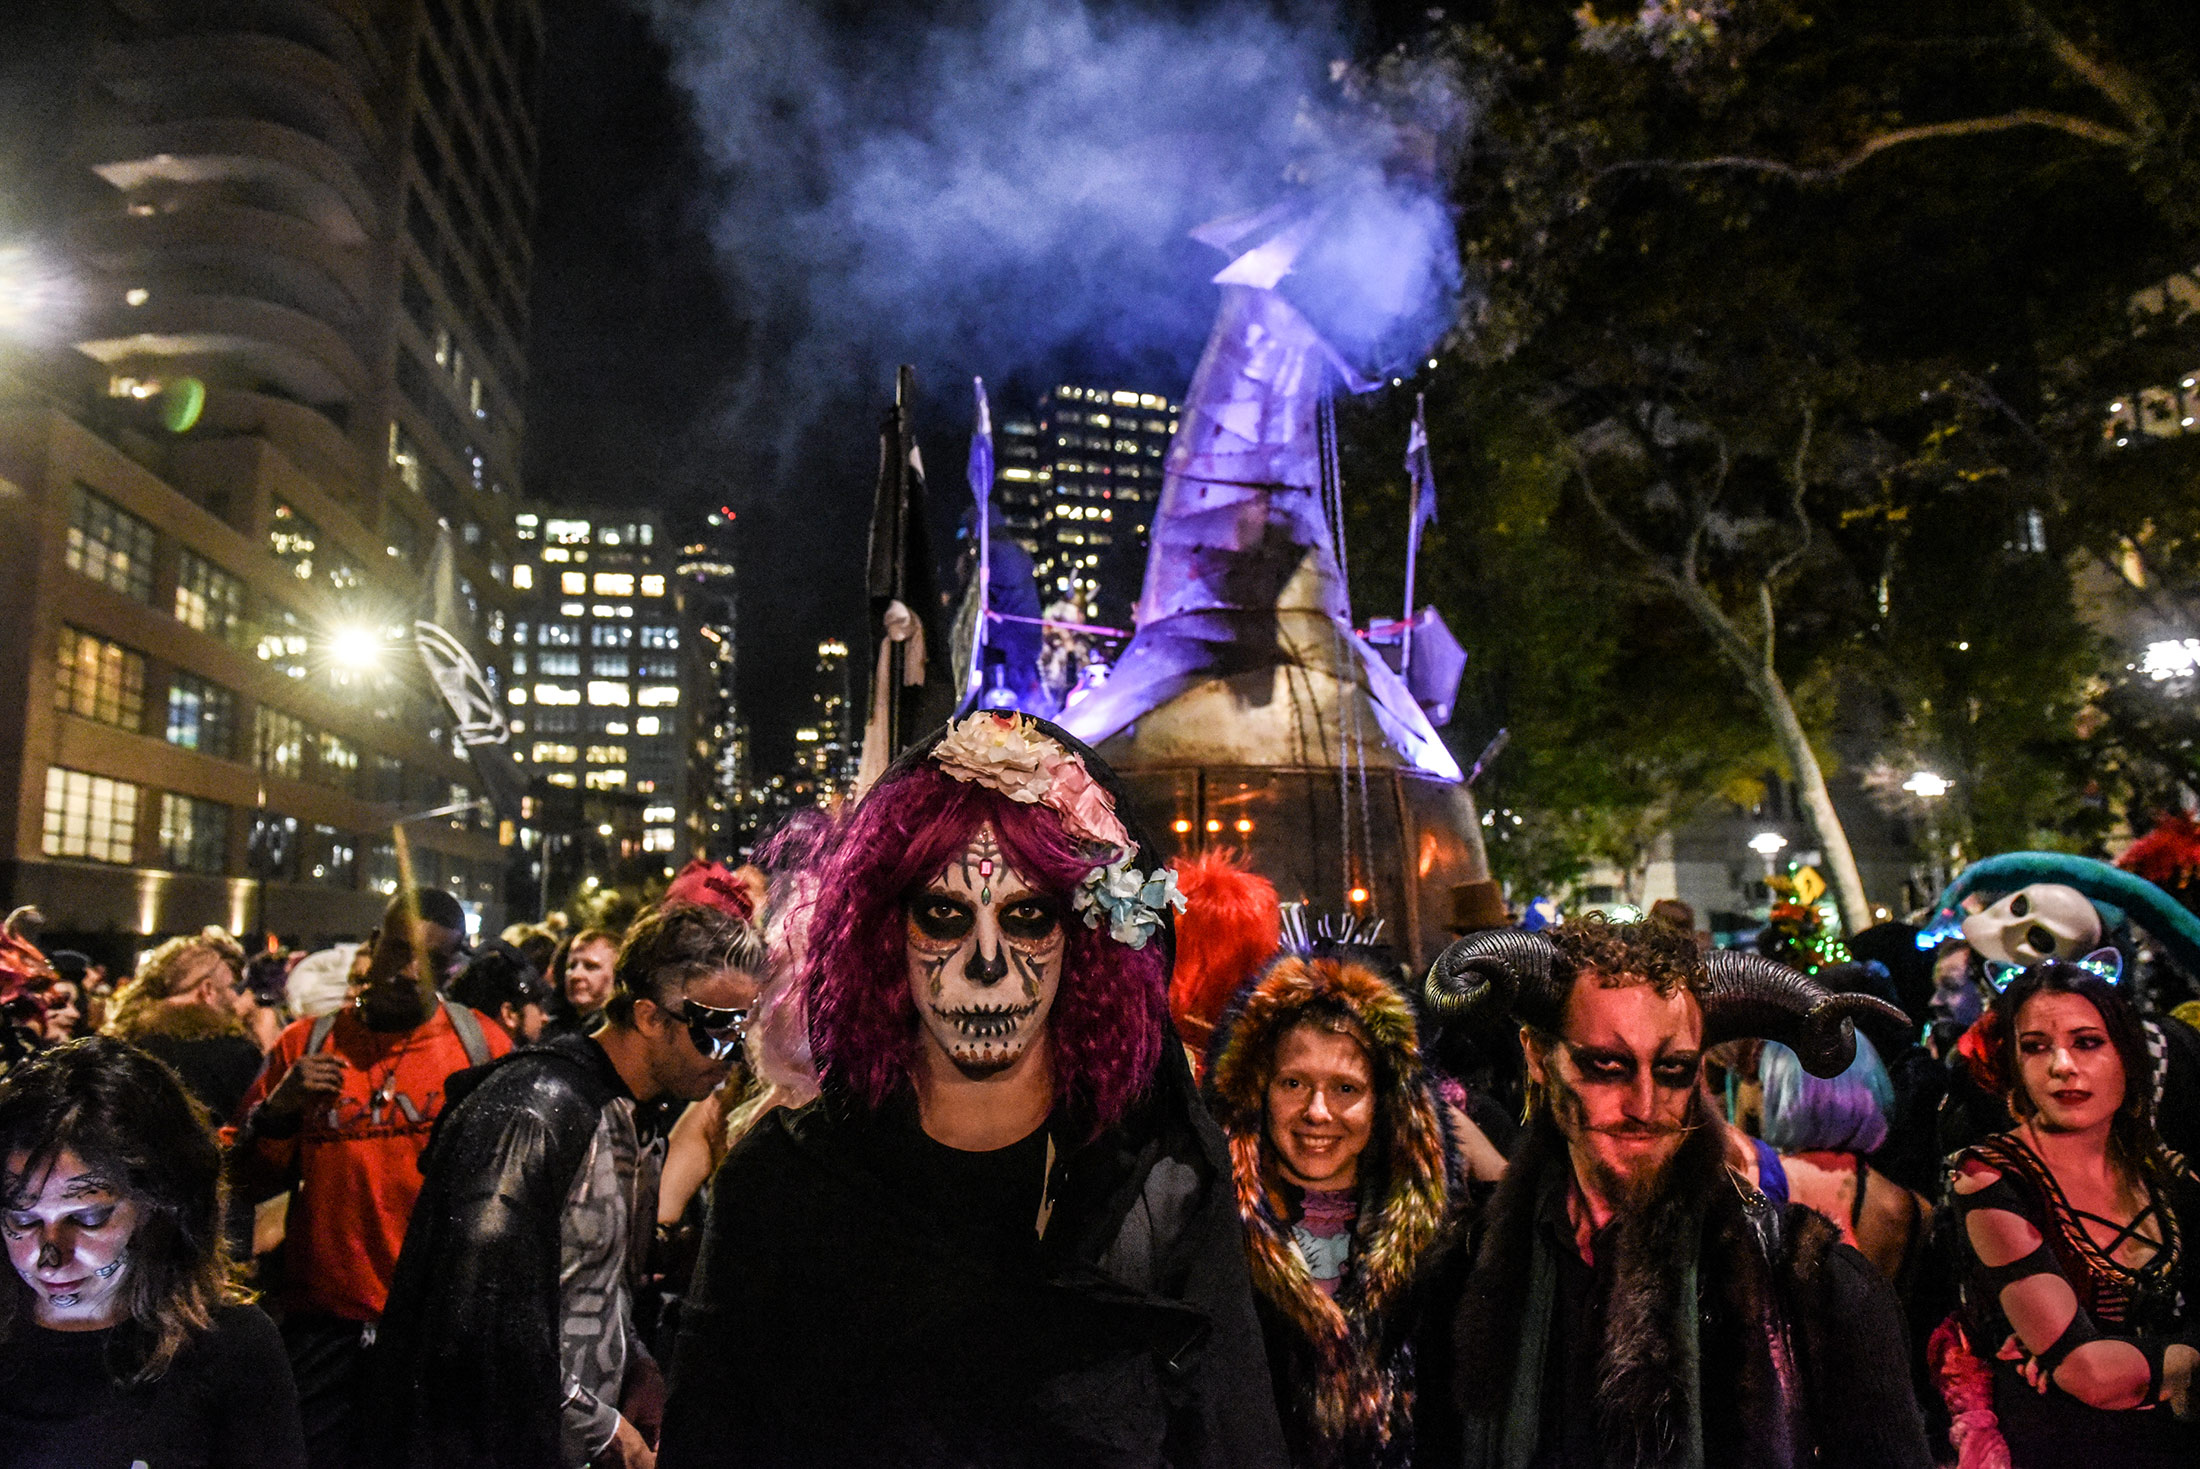 The Halloween parade in New York City&nbsp;draws more than 50,000 people in a typical year. It is canceled for 2020 to prevent spreading the Covid-19 virus.